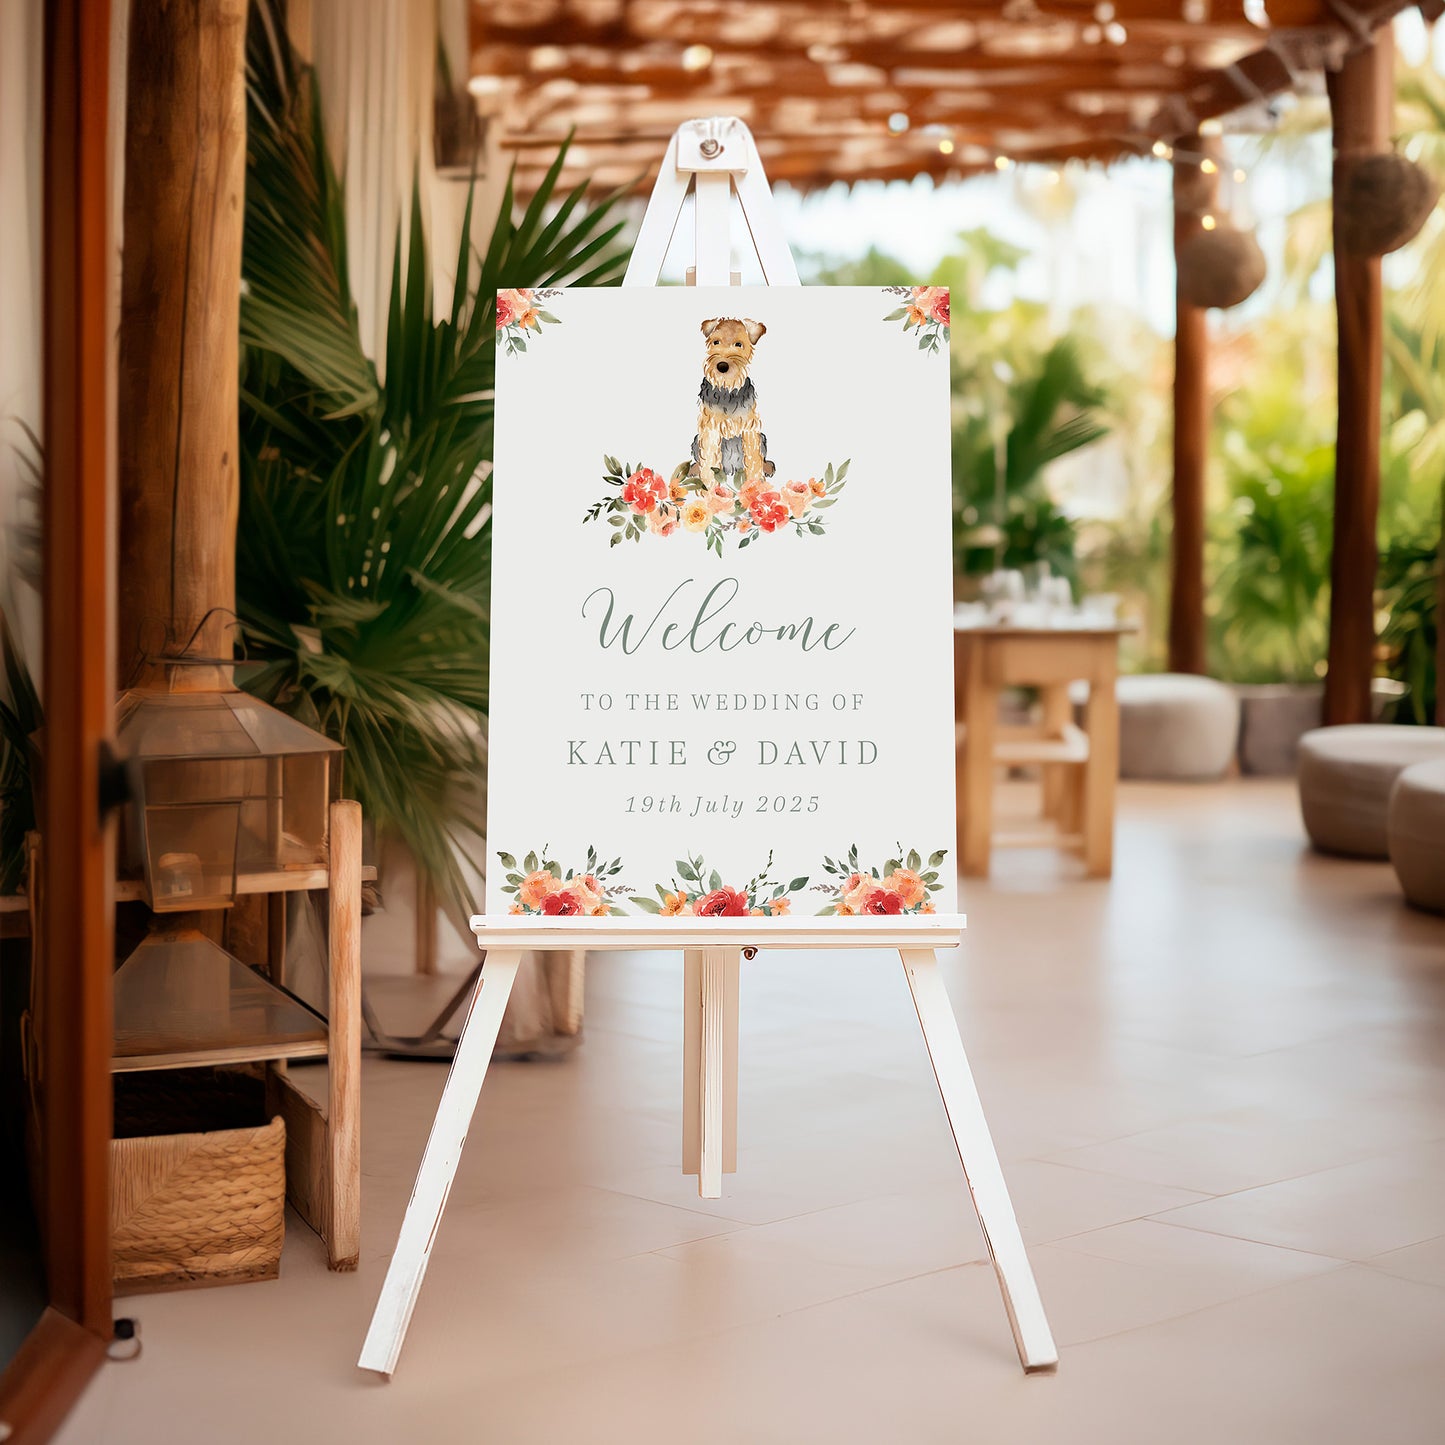 Wedding welcome sign with one dog